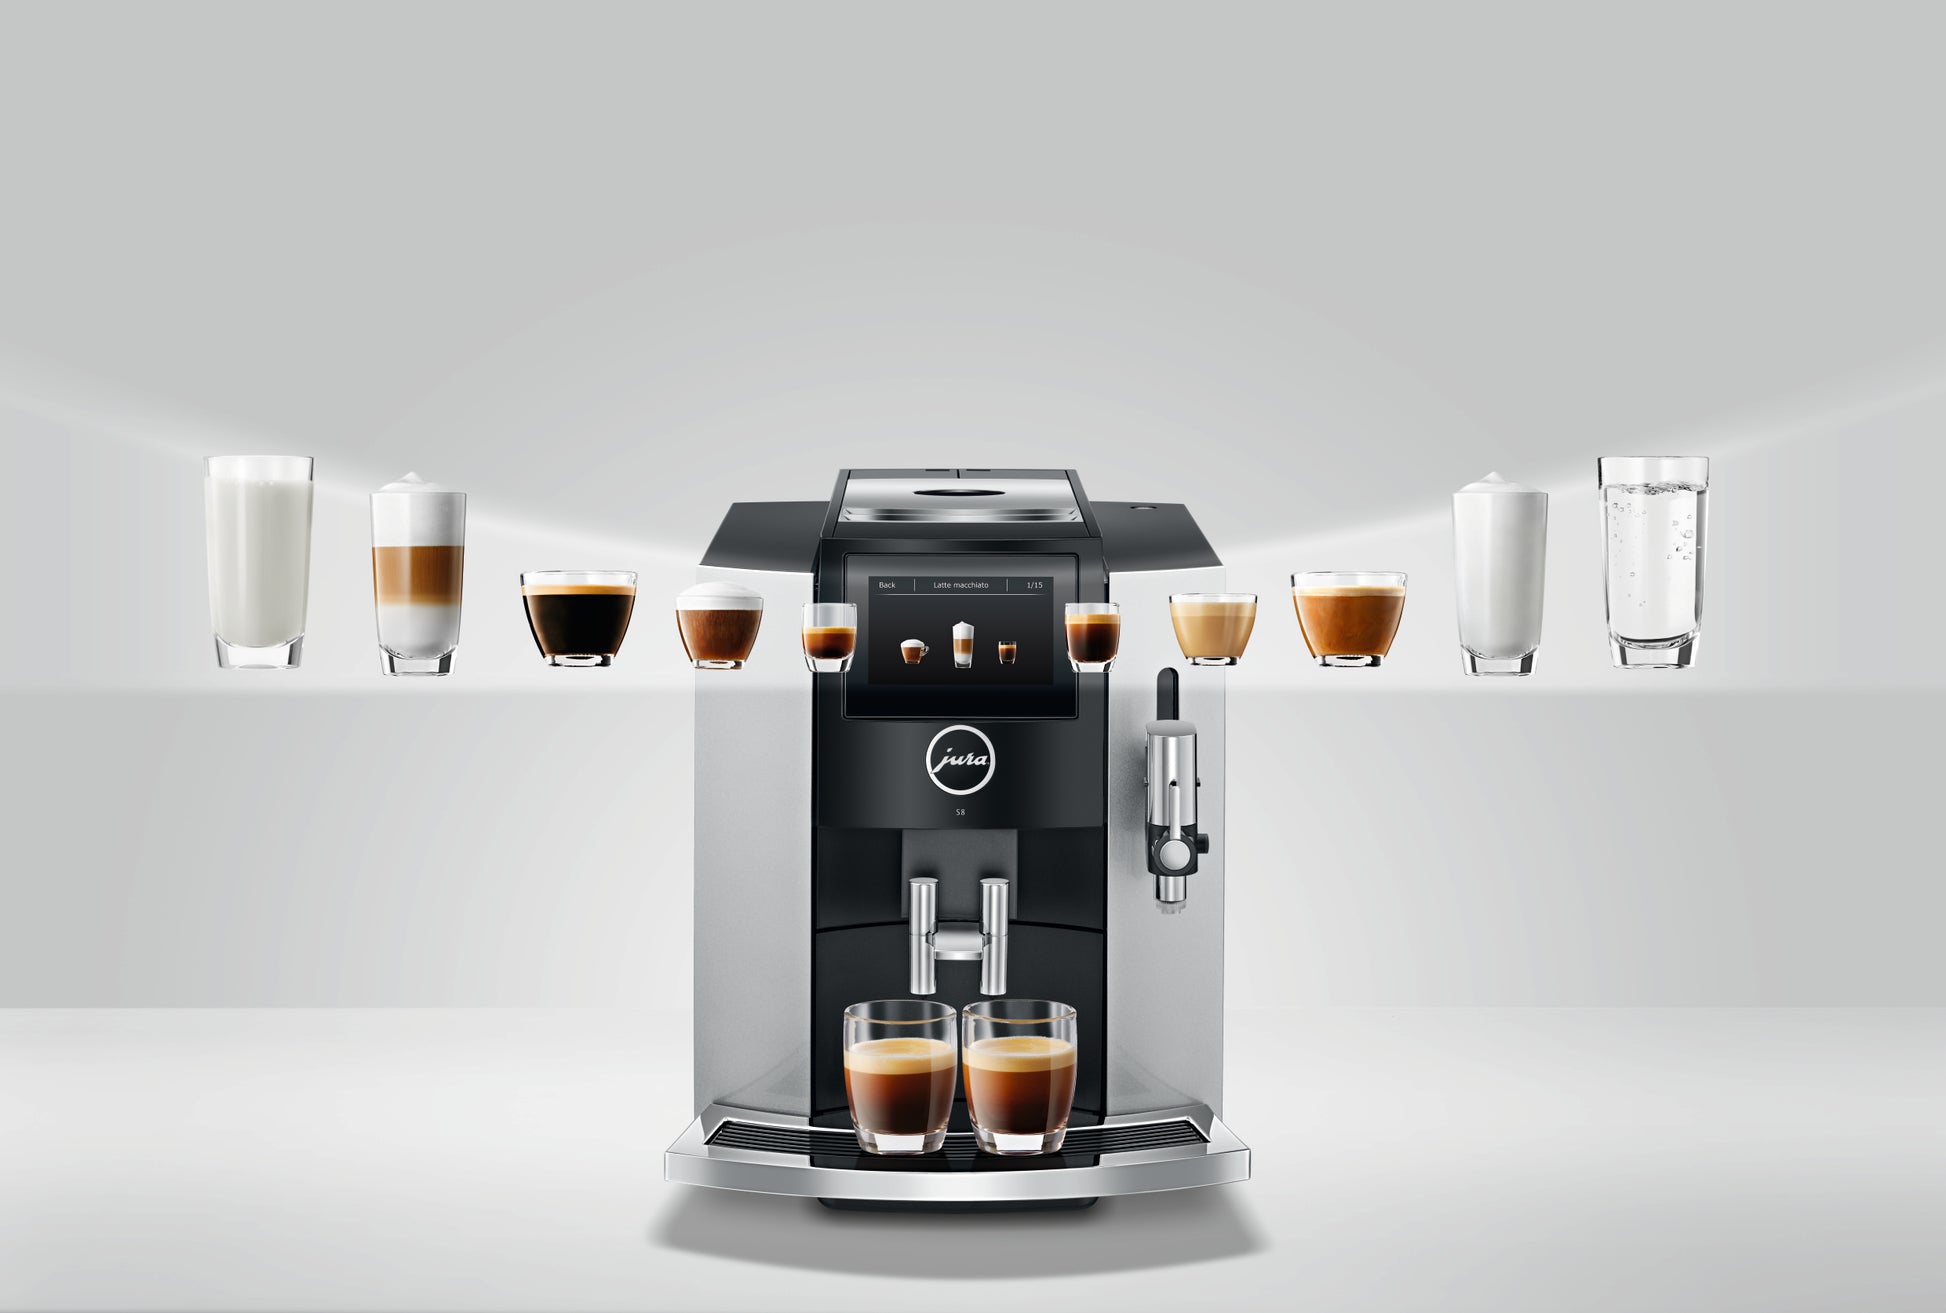 11 unique coffee gadgets to help put some pep in your step every